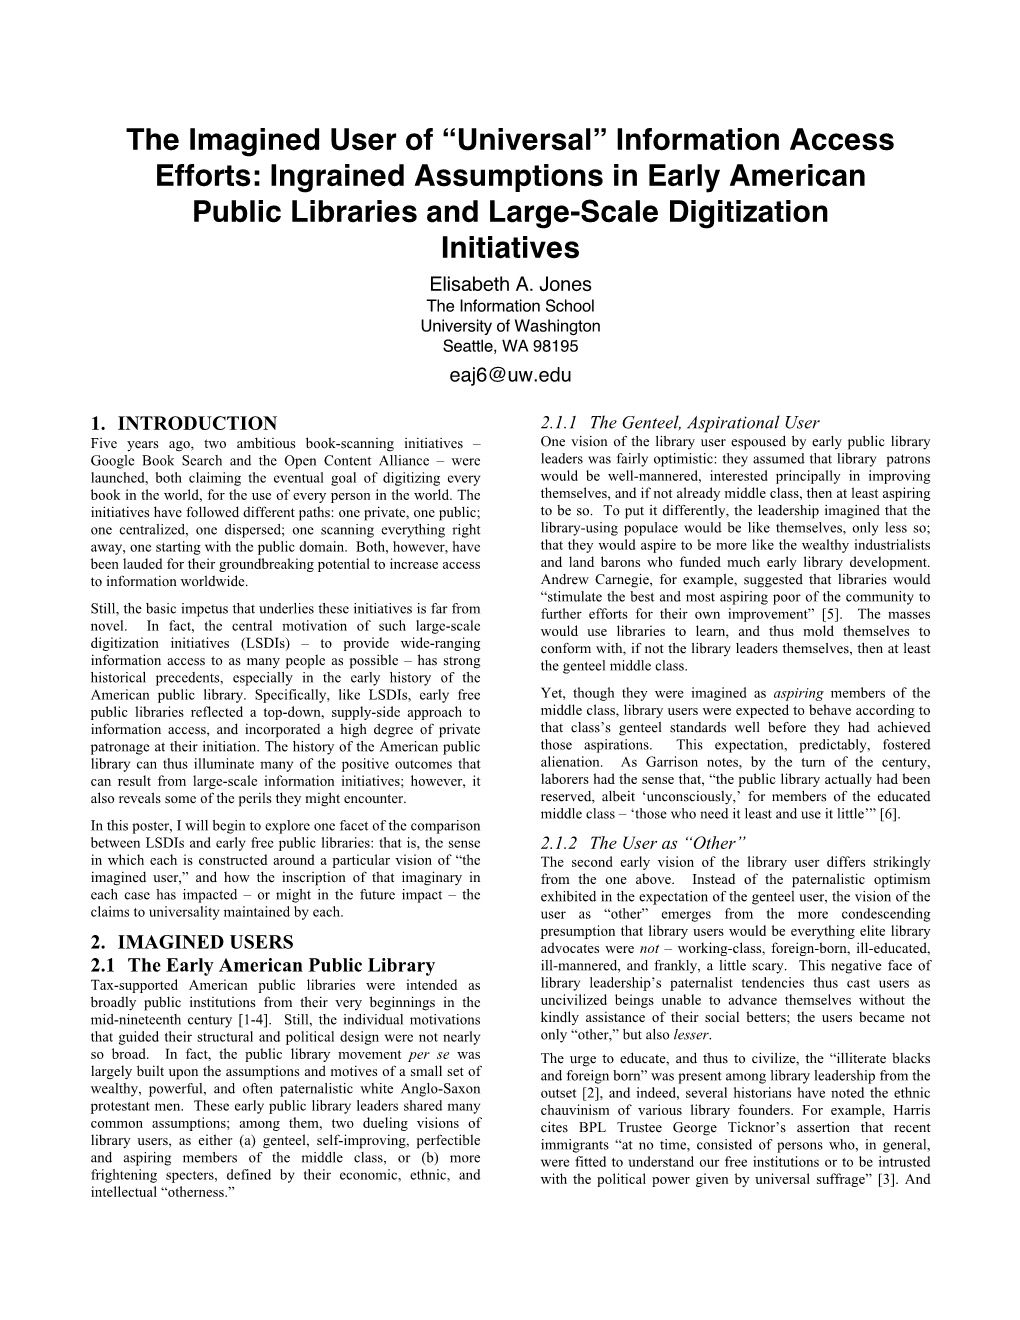 Ingrained Assumptions in Early American Public Libraries and Large-Scale Digitization Initiatives Elisabeth A